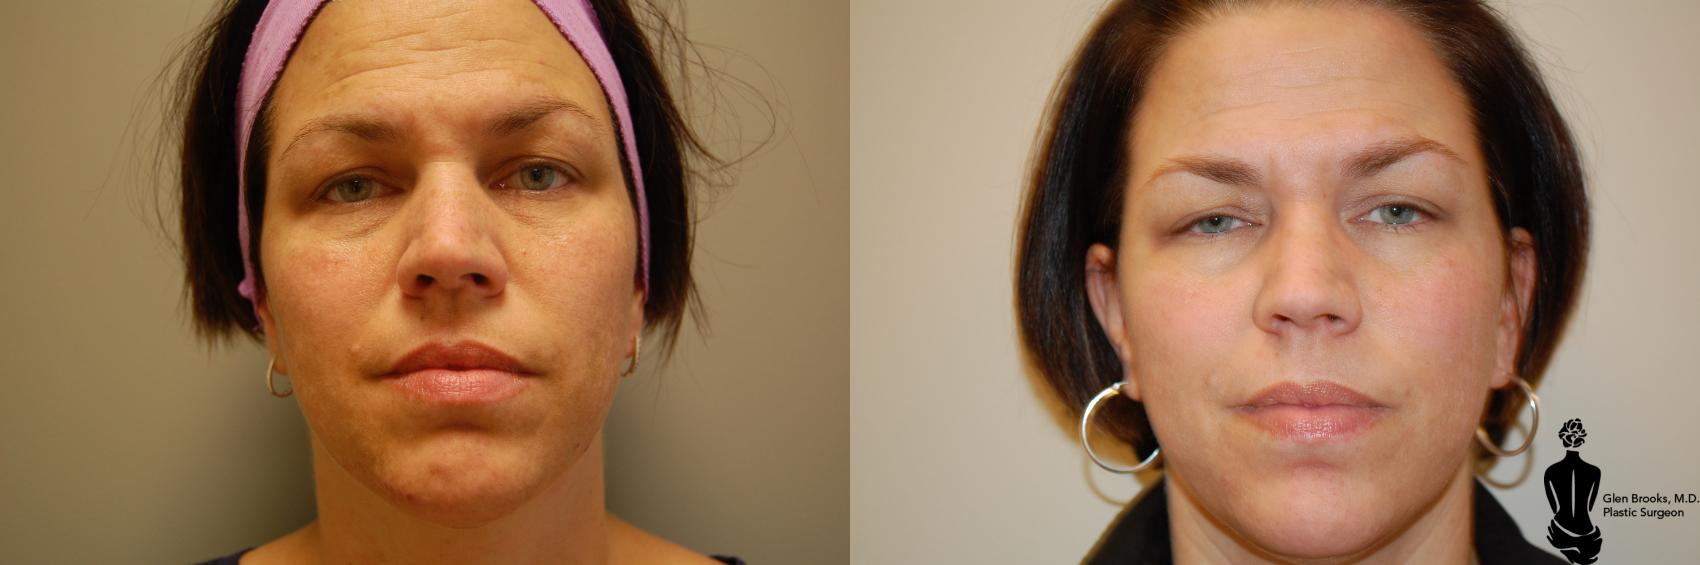 Laser Resurfacing Before & After Photo | Springfield, MA | Aesthetic Plastic & Reconstructive Surgery